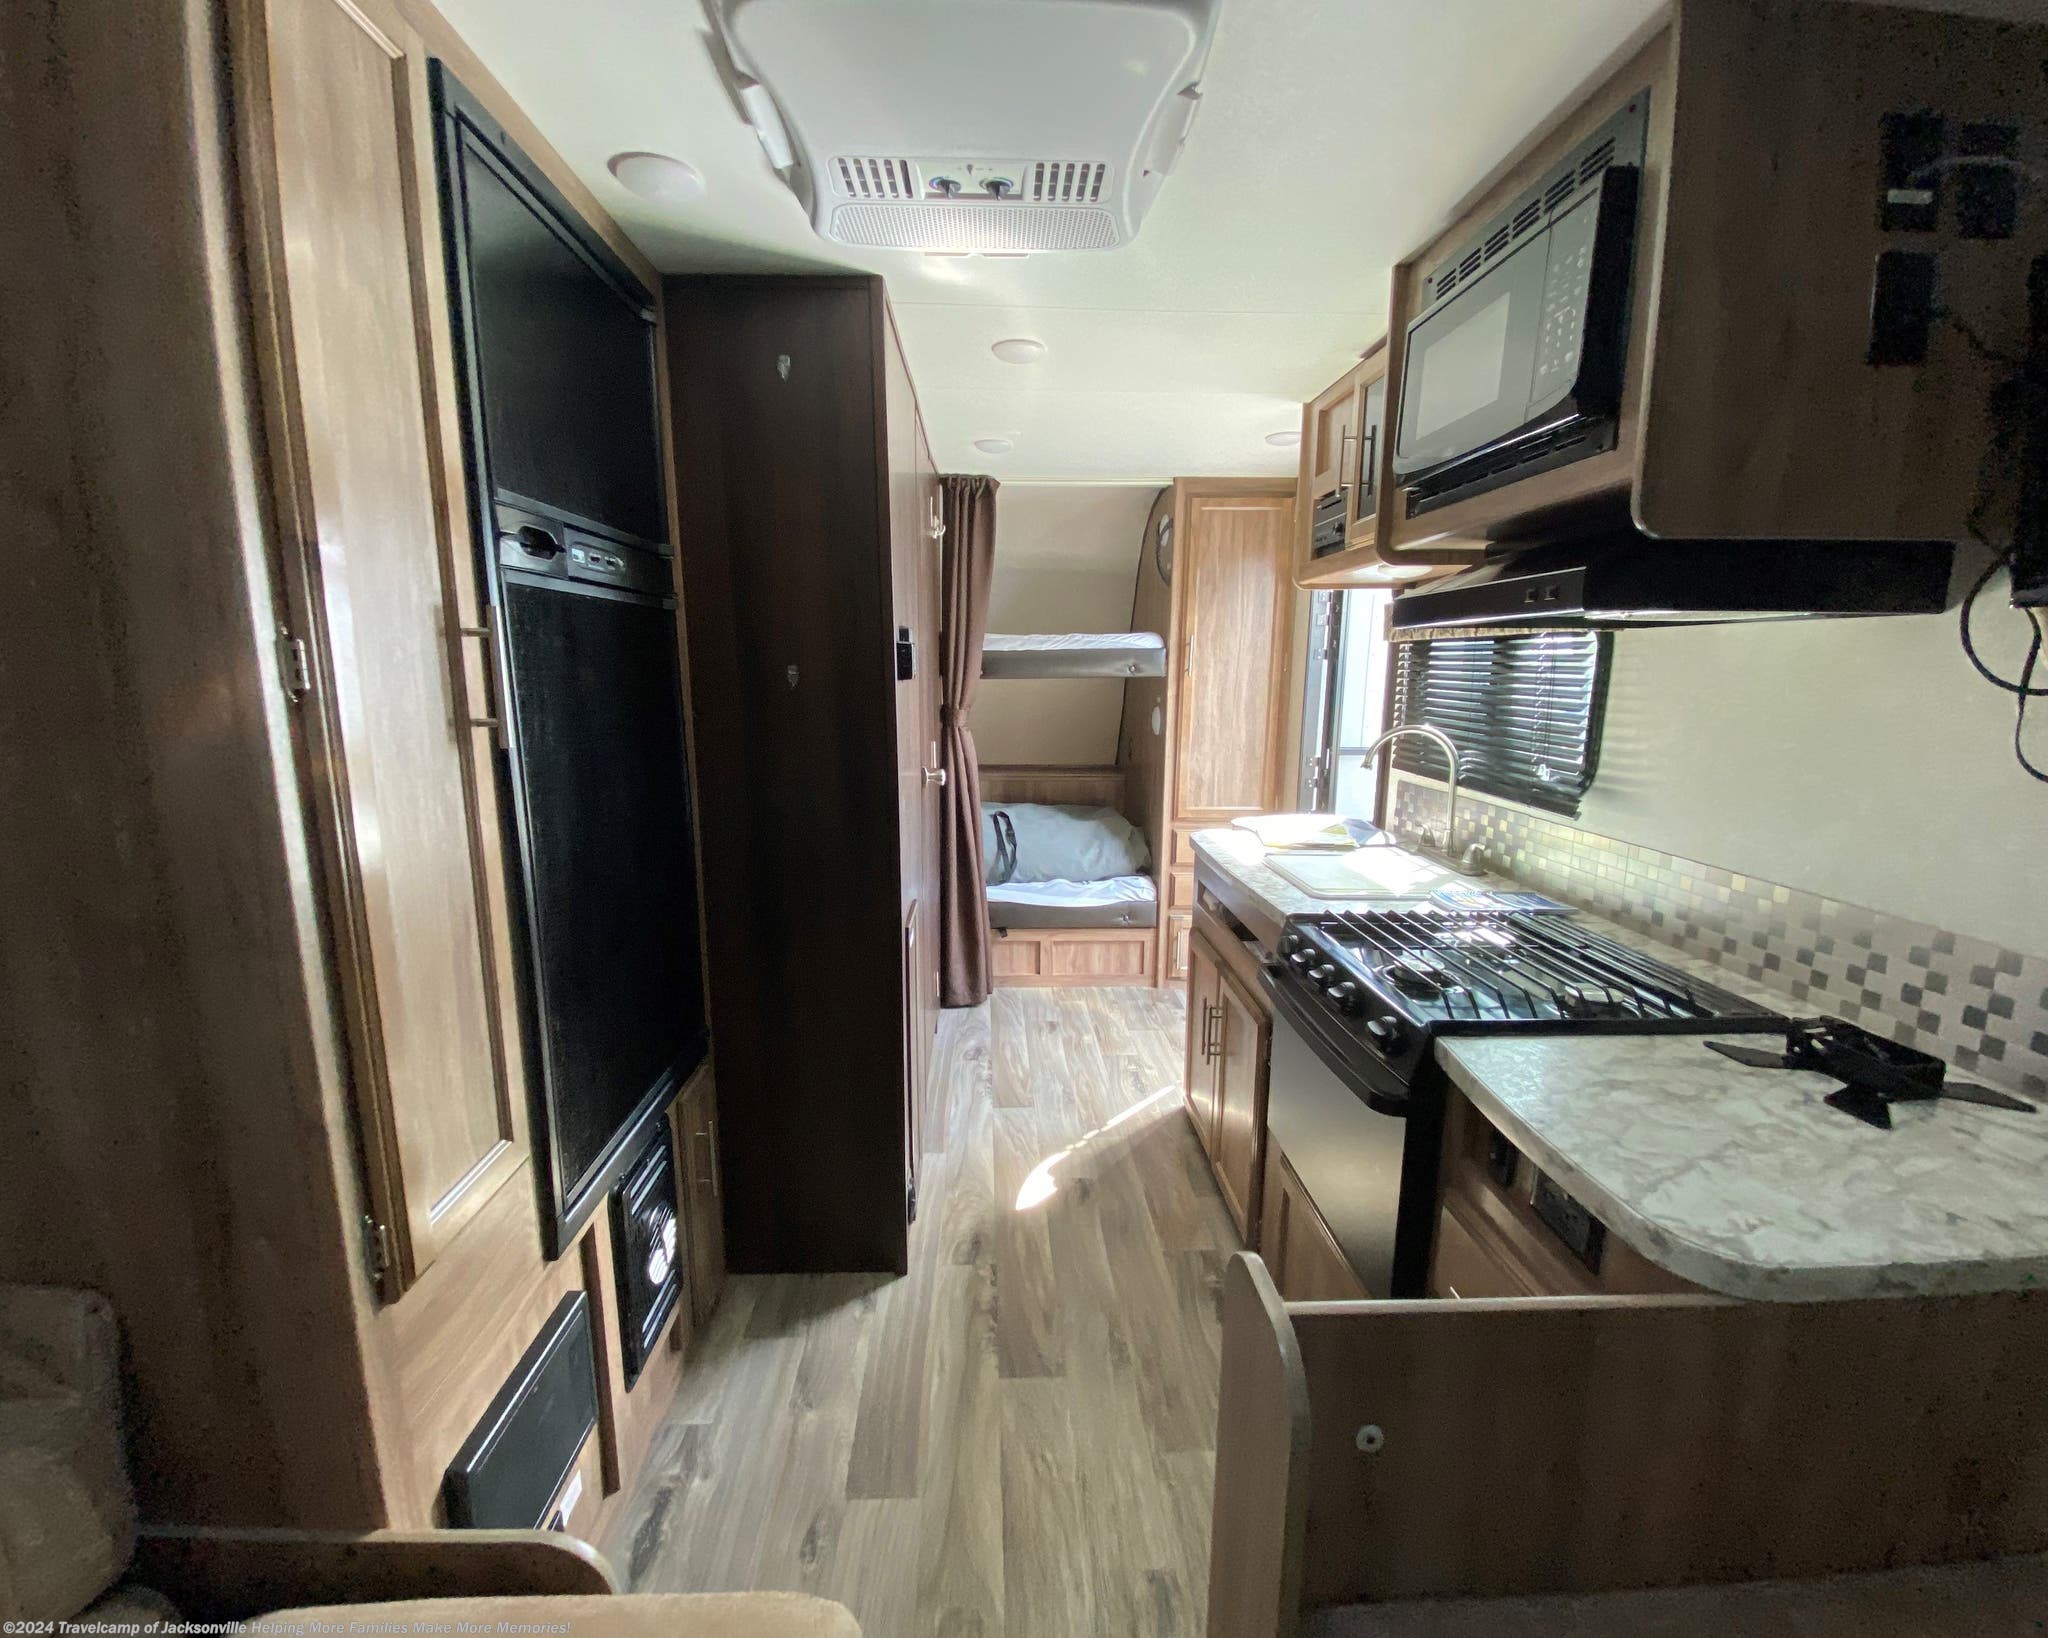 2018 Jayco Jay Feather X213 RV for Sale in Jacksonville, FL 32216 ...